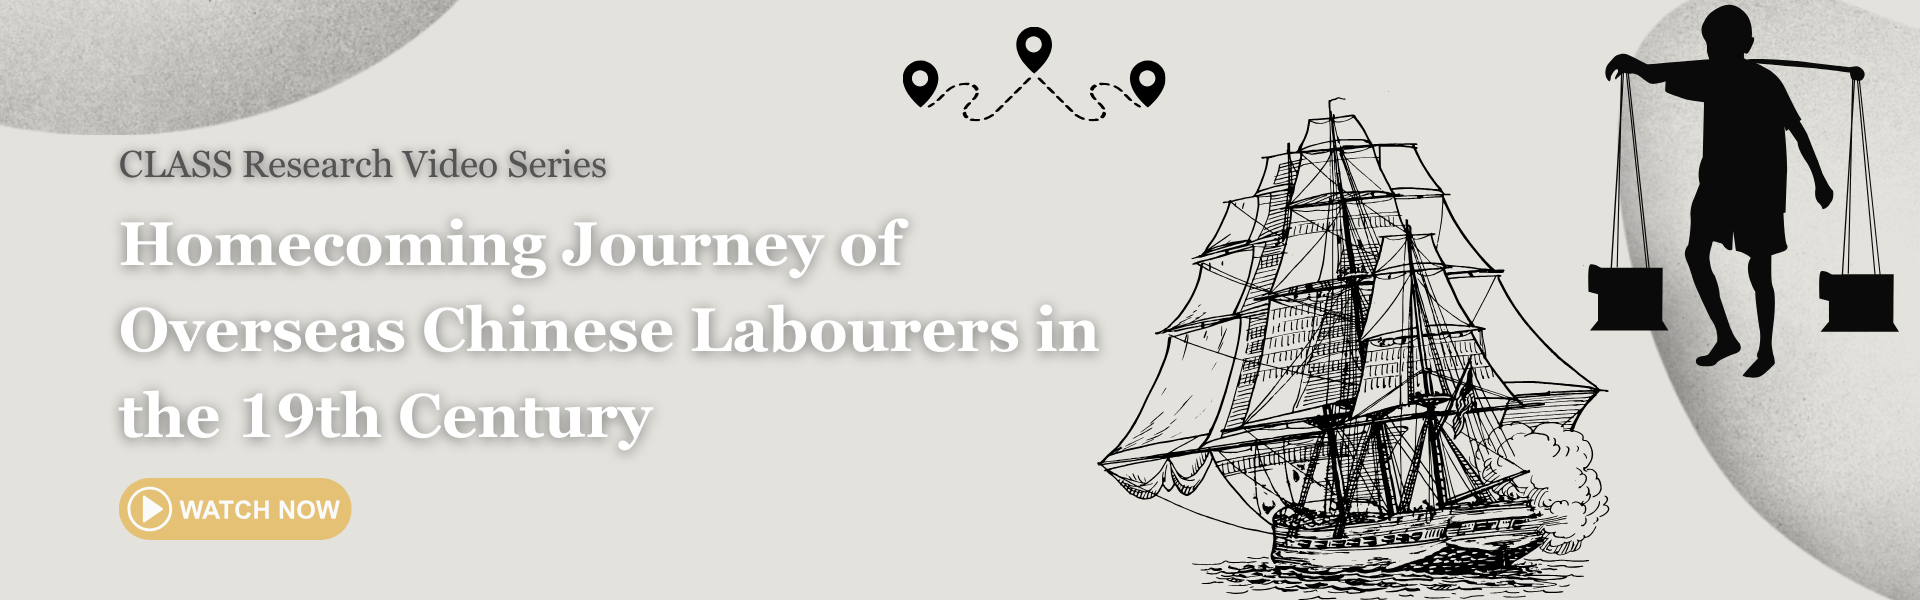 Homecoming Journey of Overseas Chinese Labourers in the 19th Century